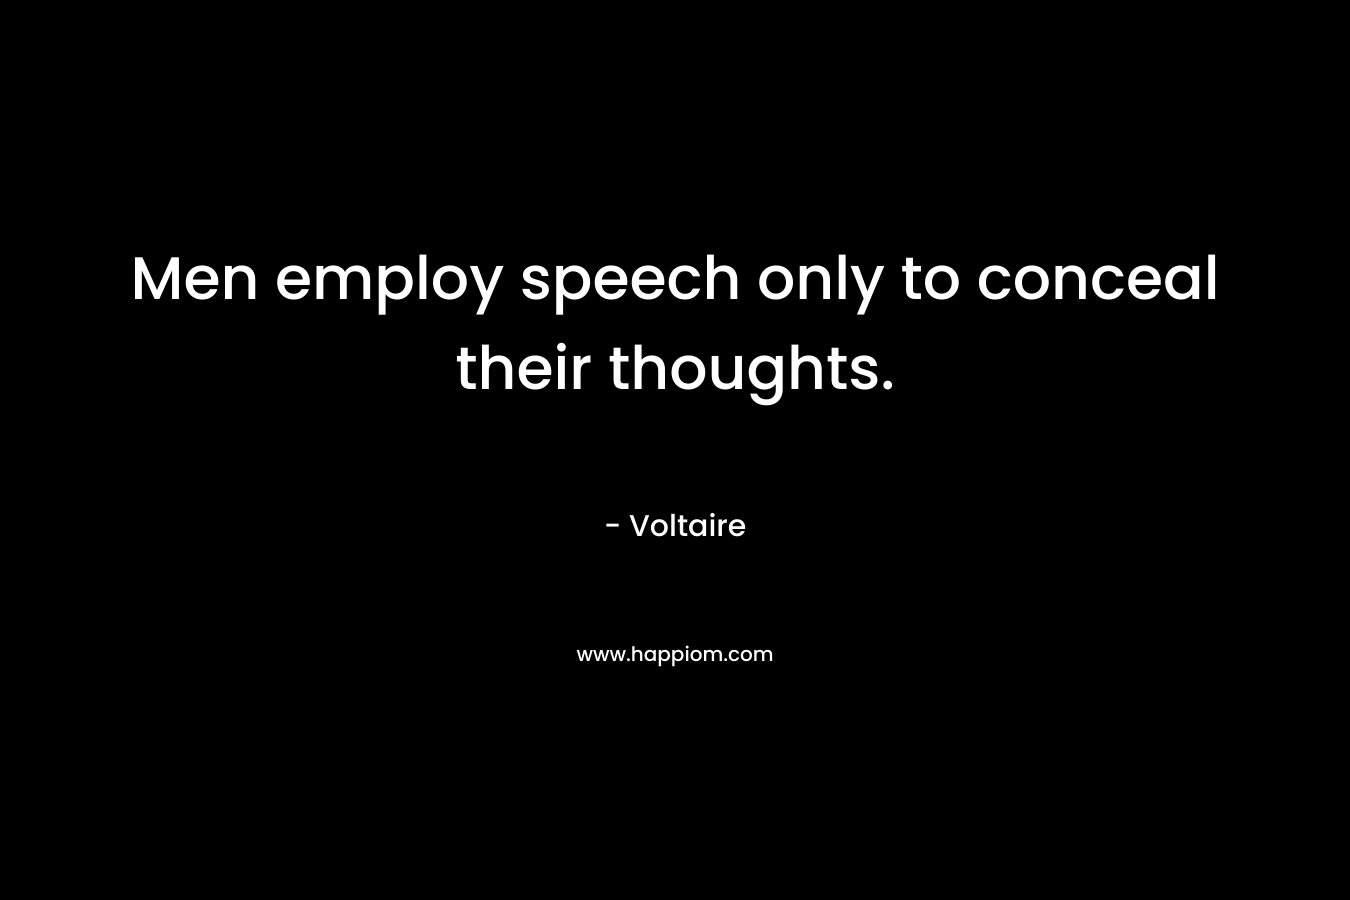 Men employ speech only to conceal their thoughts. – Voltaire